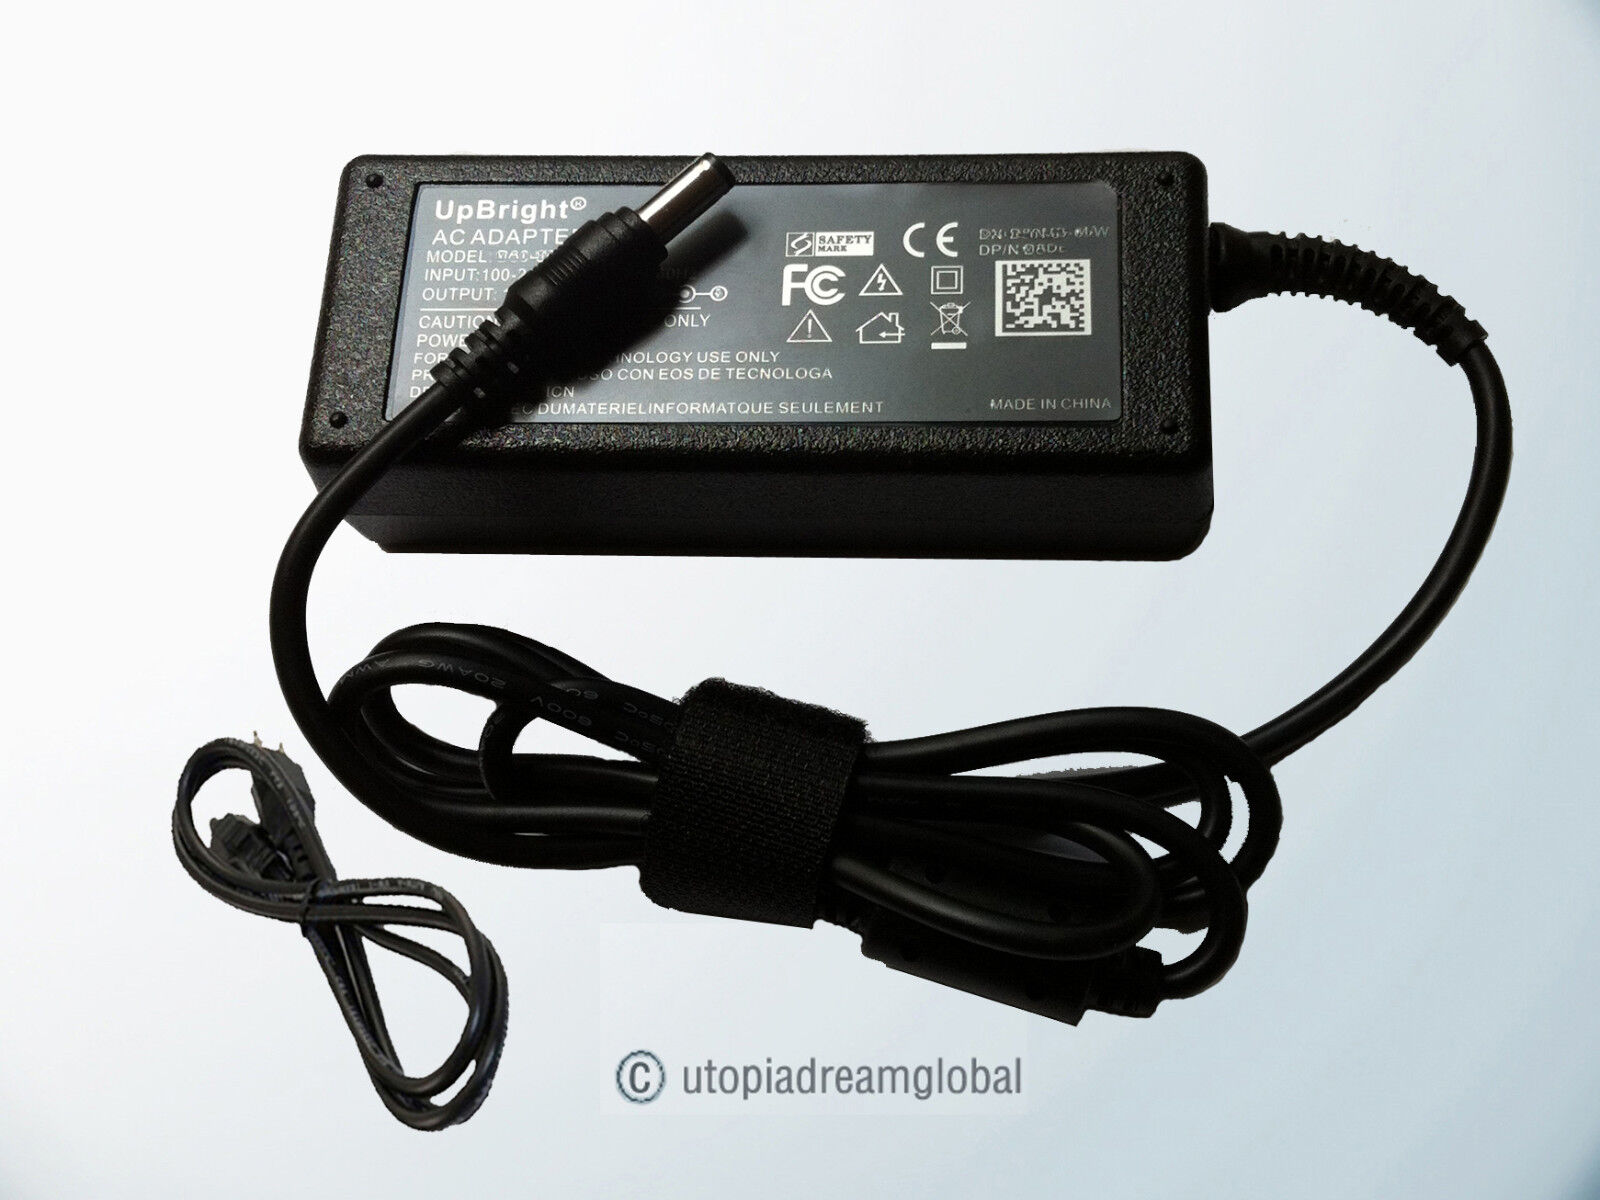 12V AC/DC Adapter For KORG M50-61 Keyboard m50 88 Key Synthesizer M5061 Charger